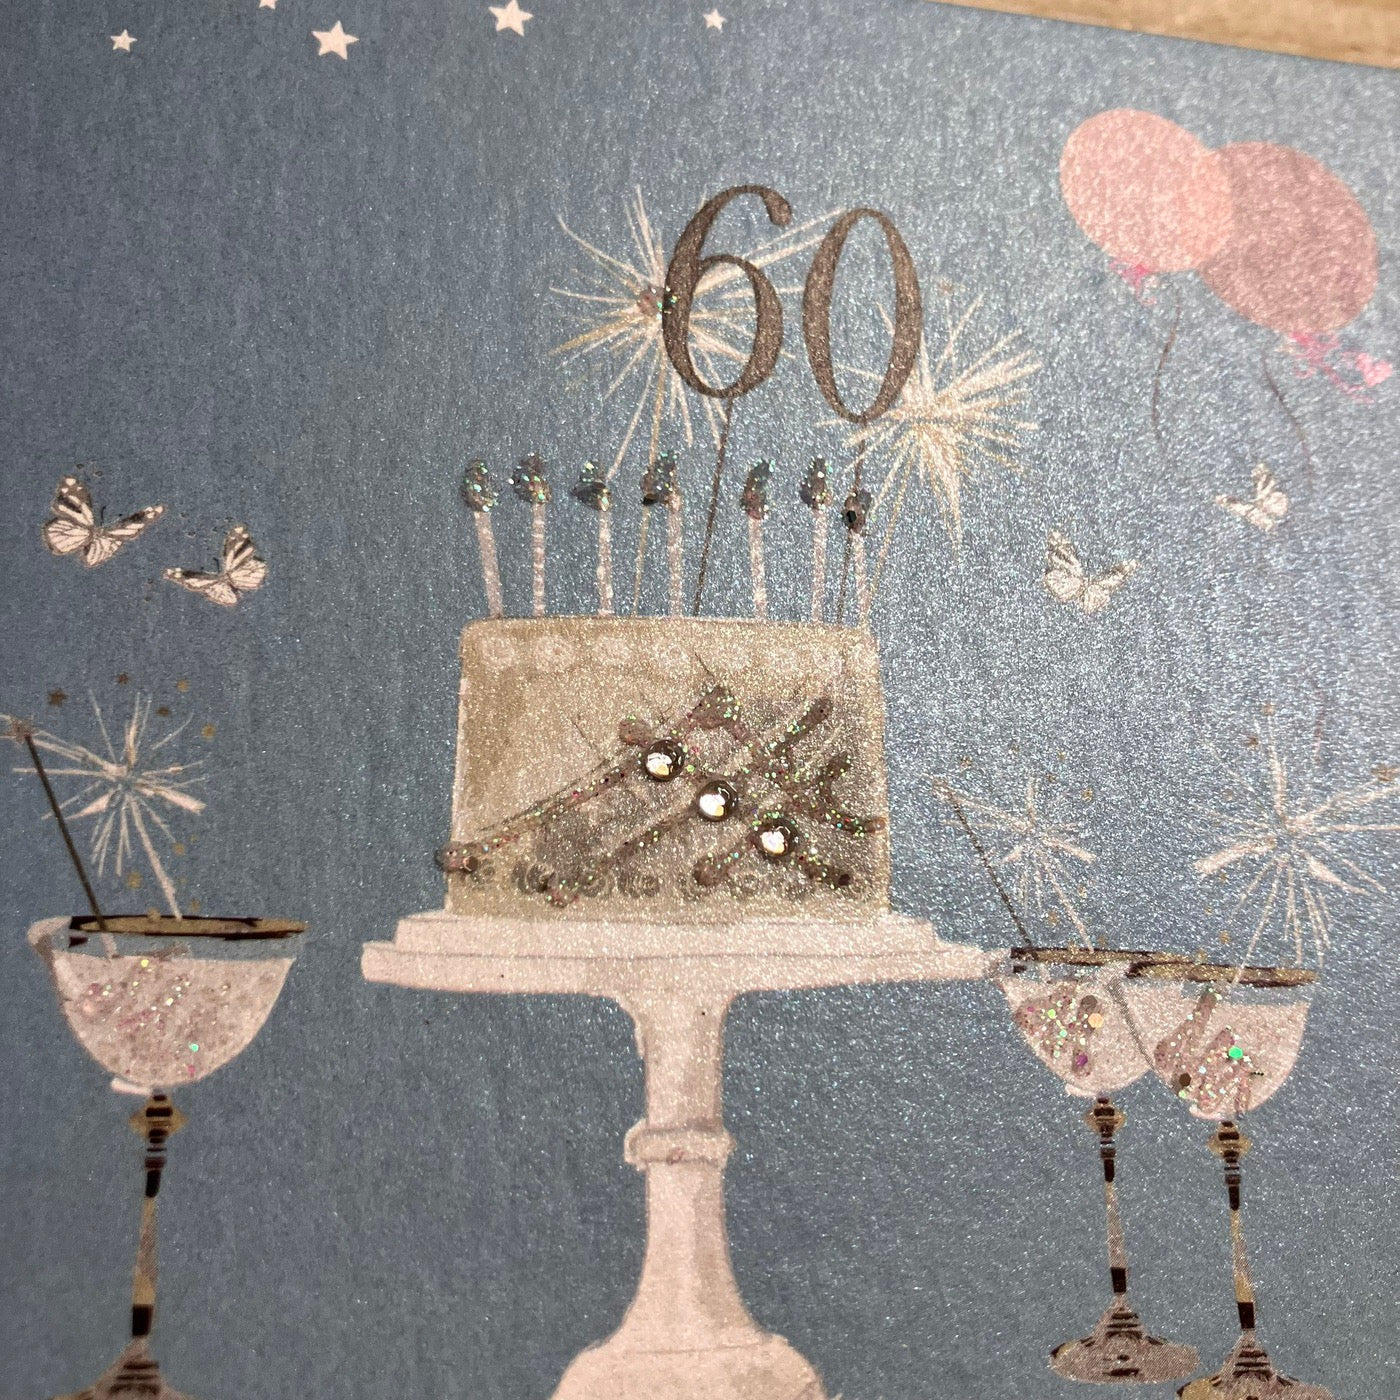 60th Birthday Teal Blue Sparkly Cake & Glasses Card - White Cotton Cards